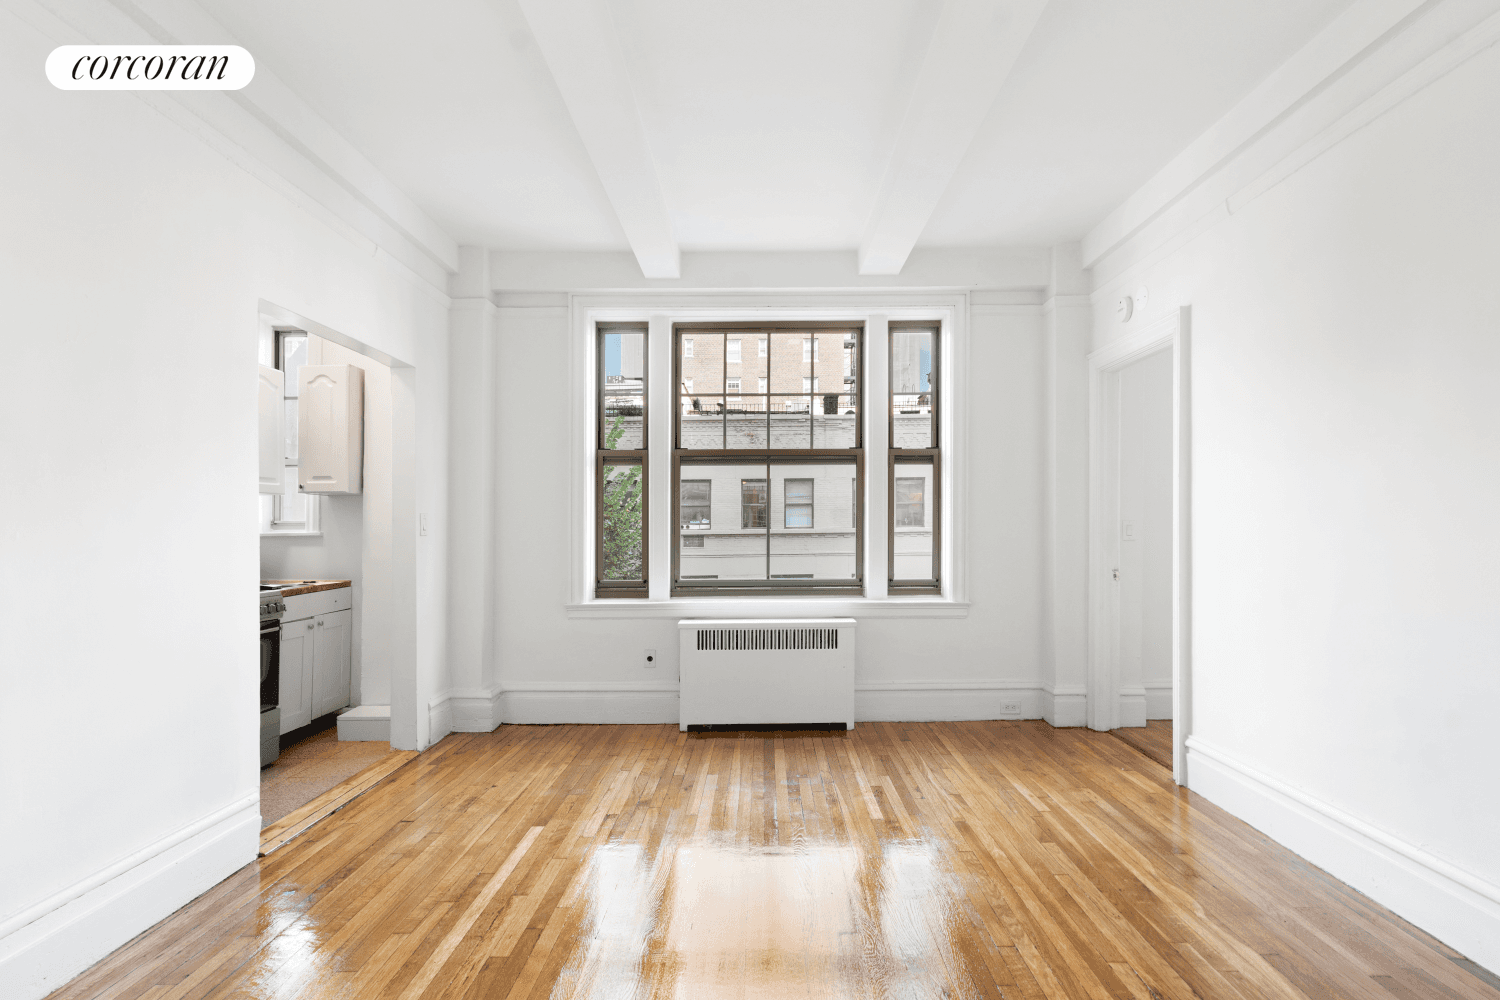 Large, one bedroom apartment in a doorman building on a prime Upper West Side block.